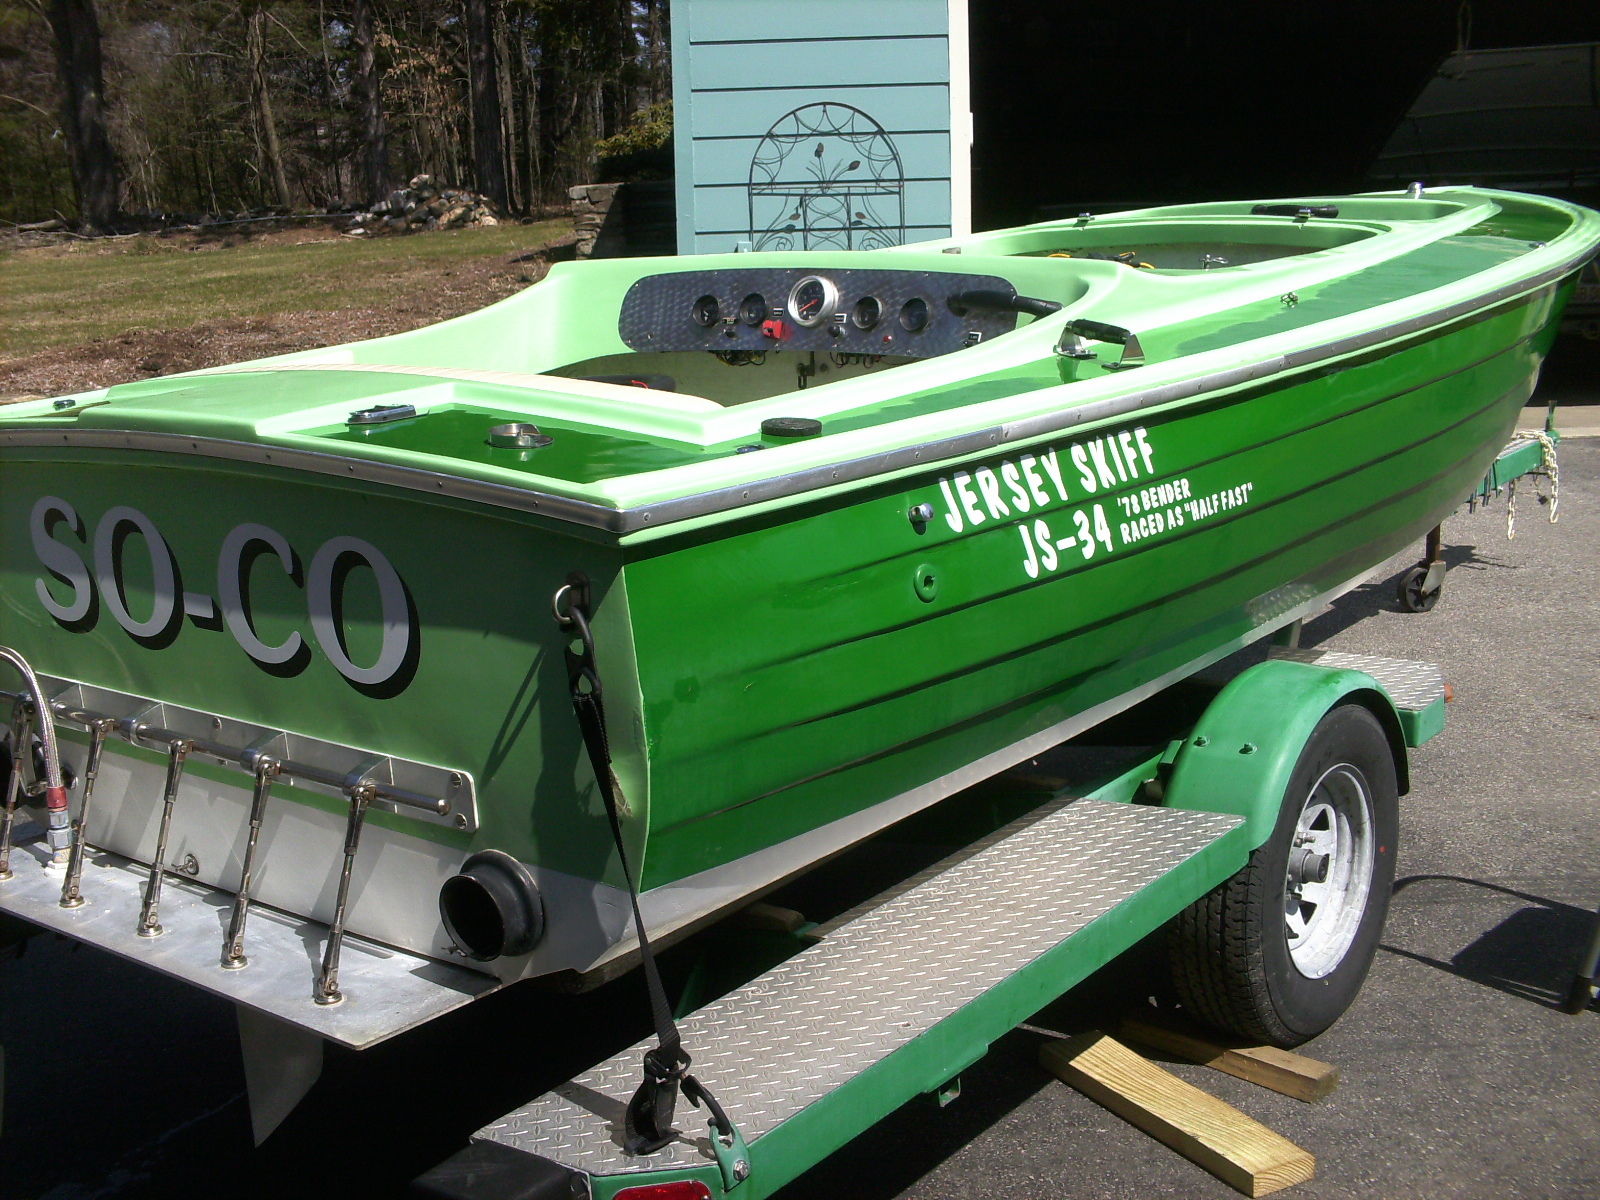 bender machine jersey speed skiff 1978 for sale for 